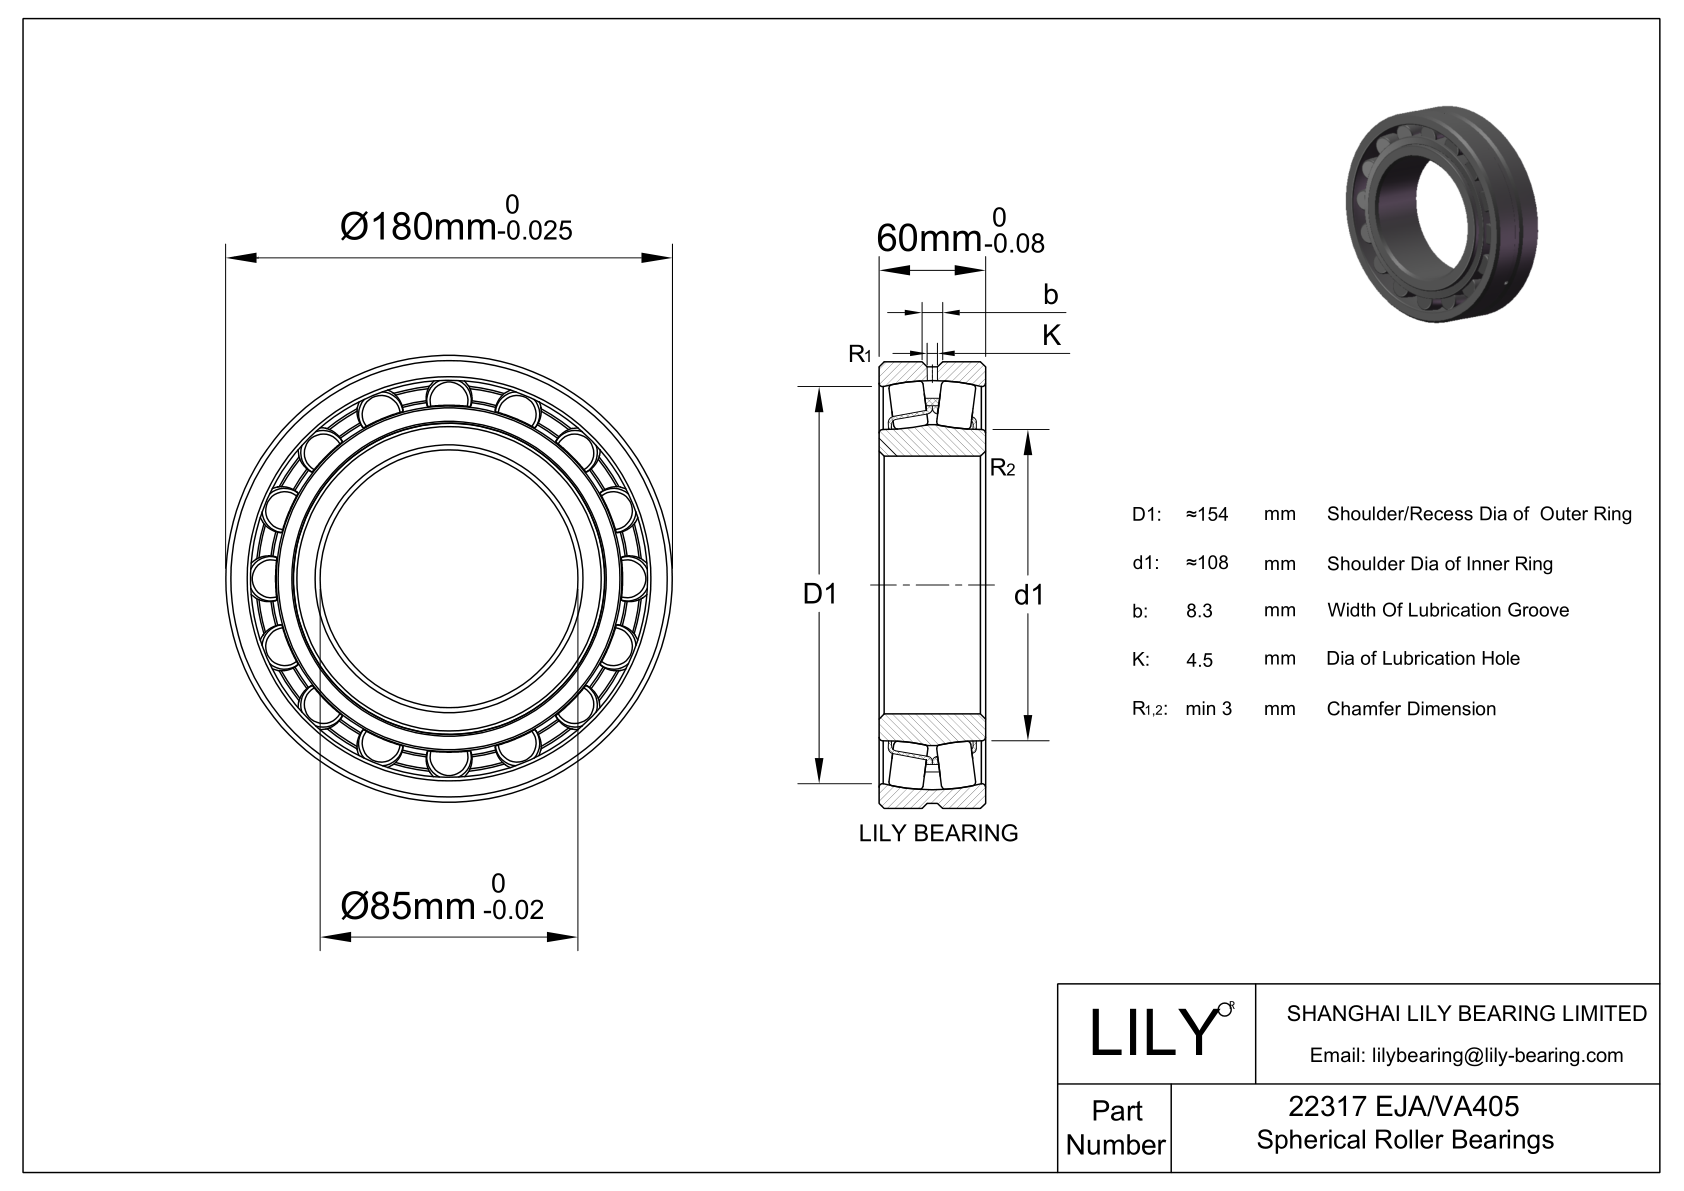 22317 EJA/VA405 Double Row Spherical Roller Bearing cad drawing